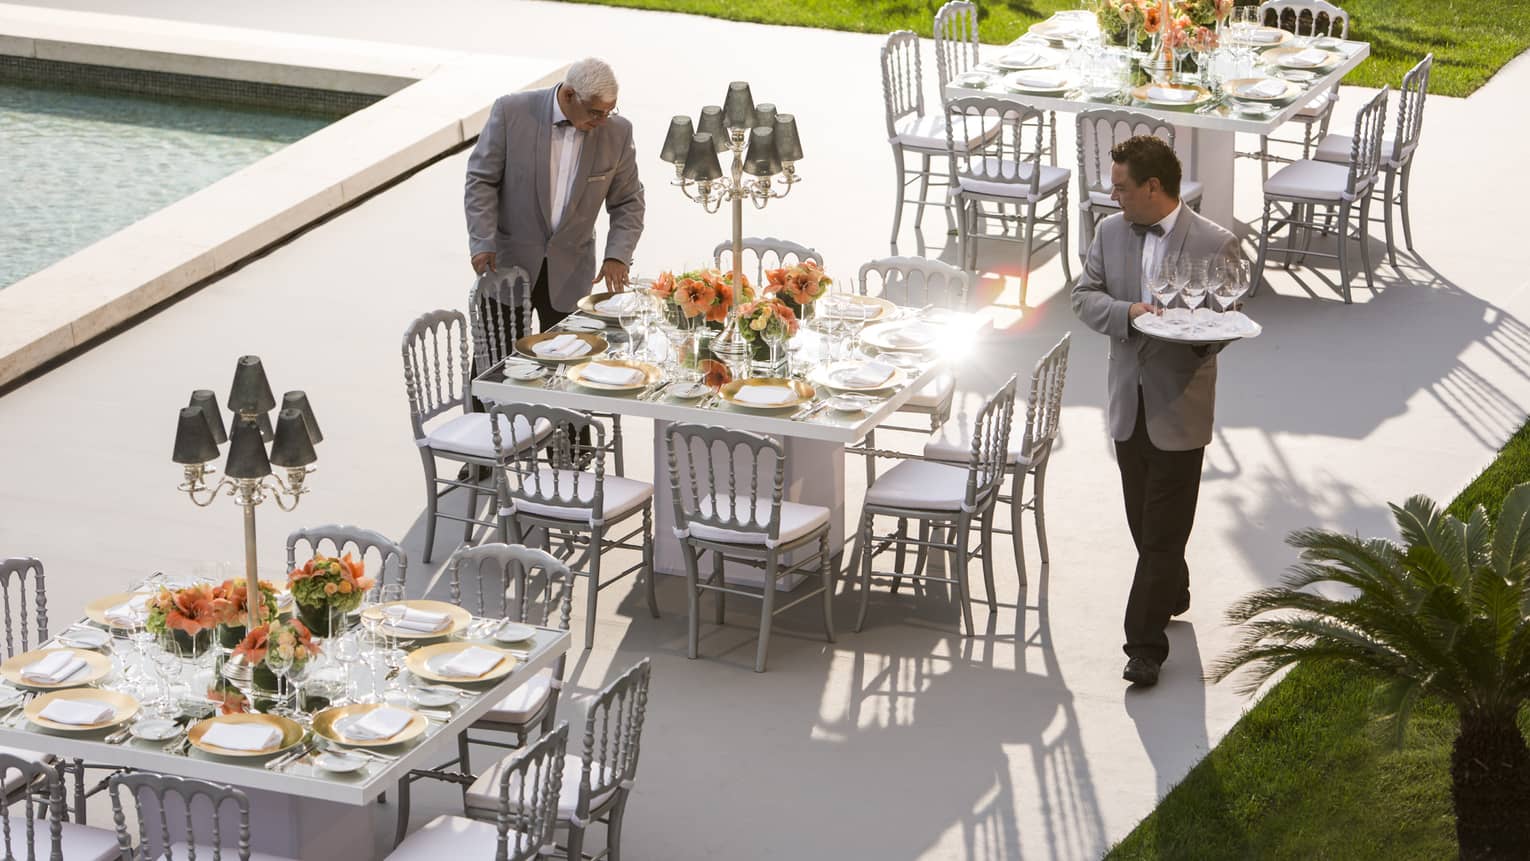 Four Seasons Hotel Ritz Lisbon staff set small banquet tables on outdoor event terrace